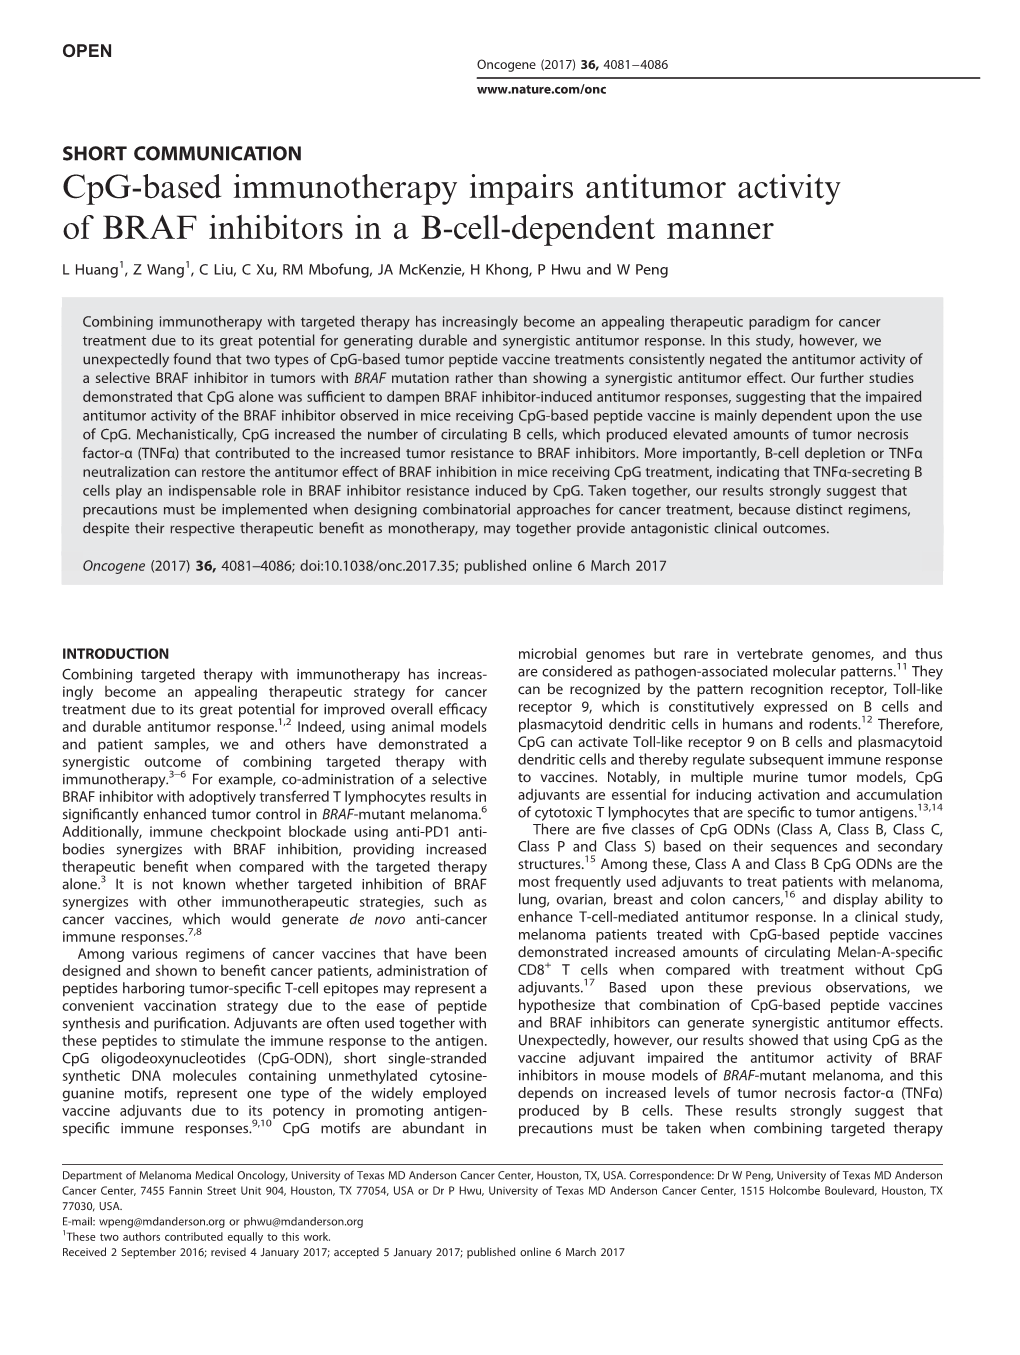 Cpg-Based Immunotherapy Impairs Antitumor Activity of BRAF Inhibitors in a B-Cell-Dependent Manner